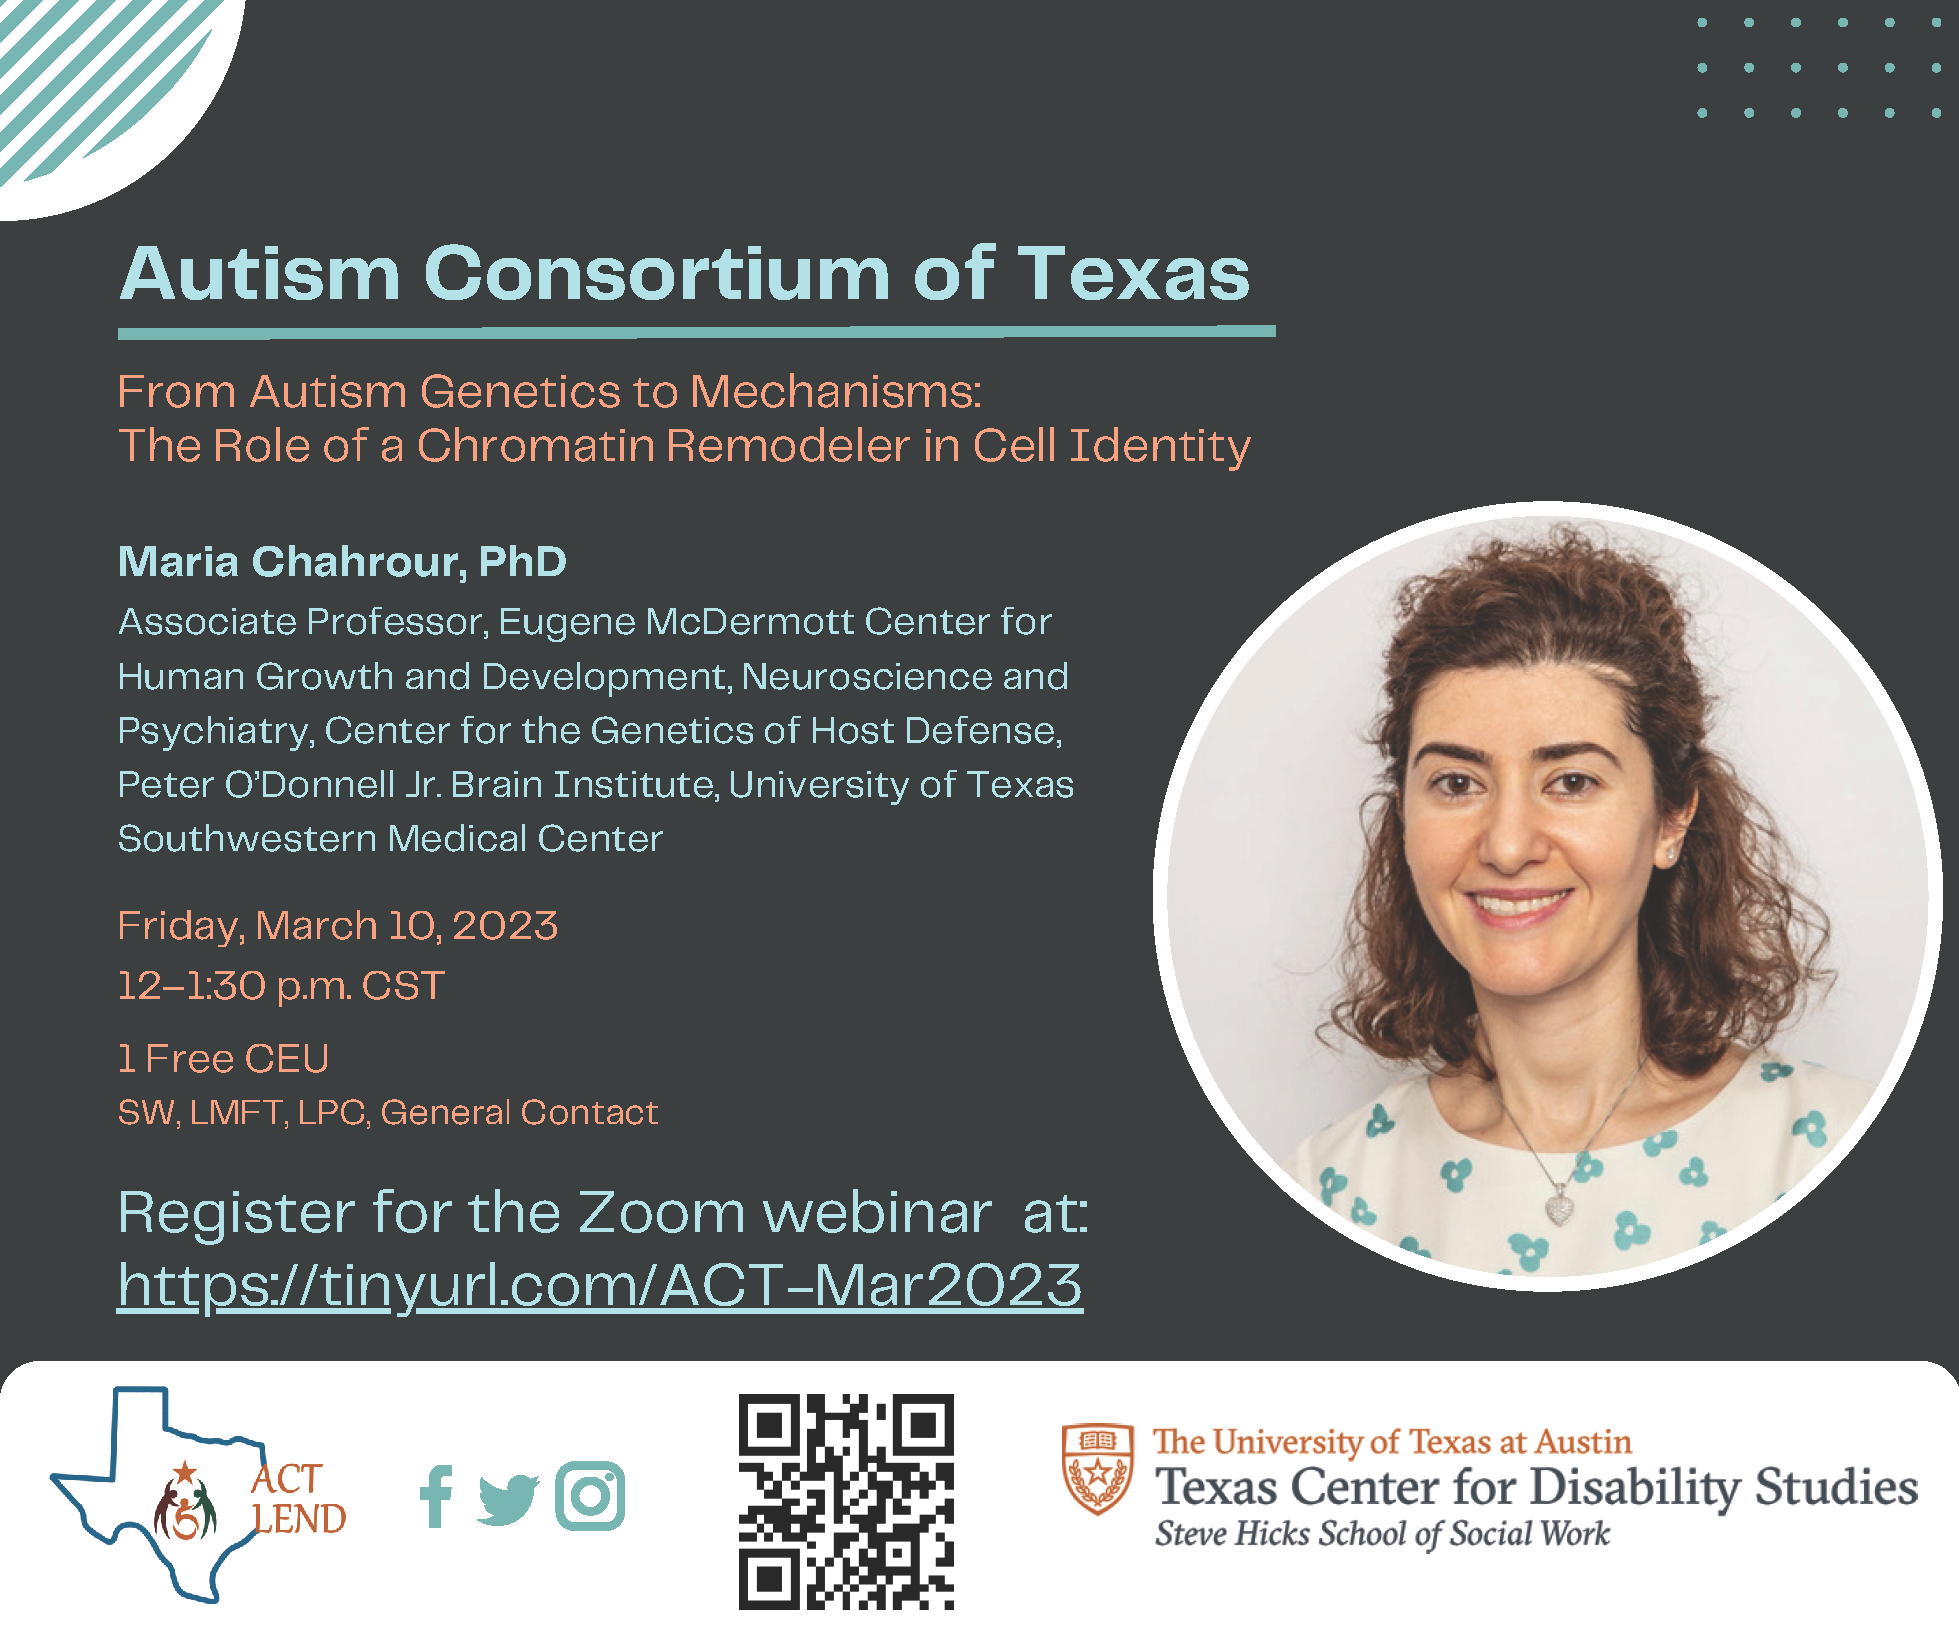 Autism Consortium of Texas March Webinar to be held on March 10, 2023; Topic: From Autism Genetics to Mechanisms: The Role of a Chromatin Remodeler in Cell Identity with Maria Chahrour, PhD.